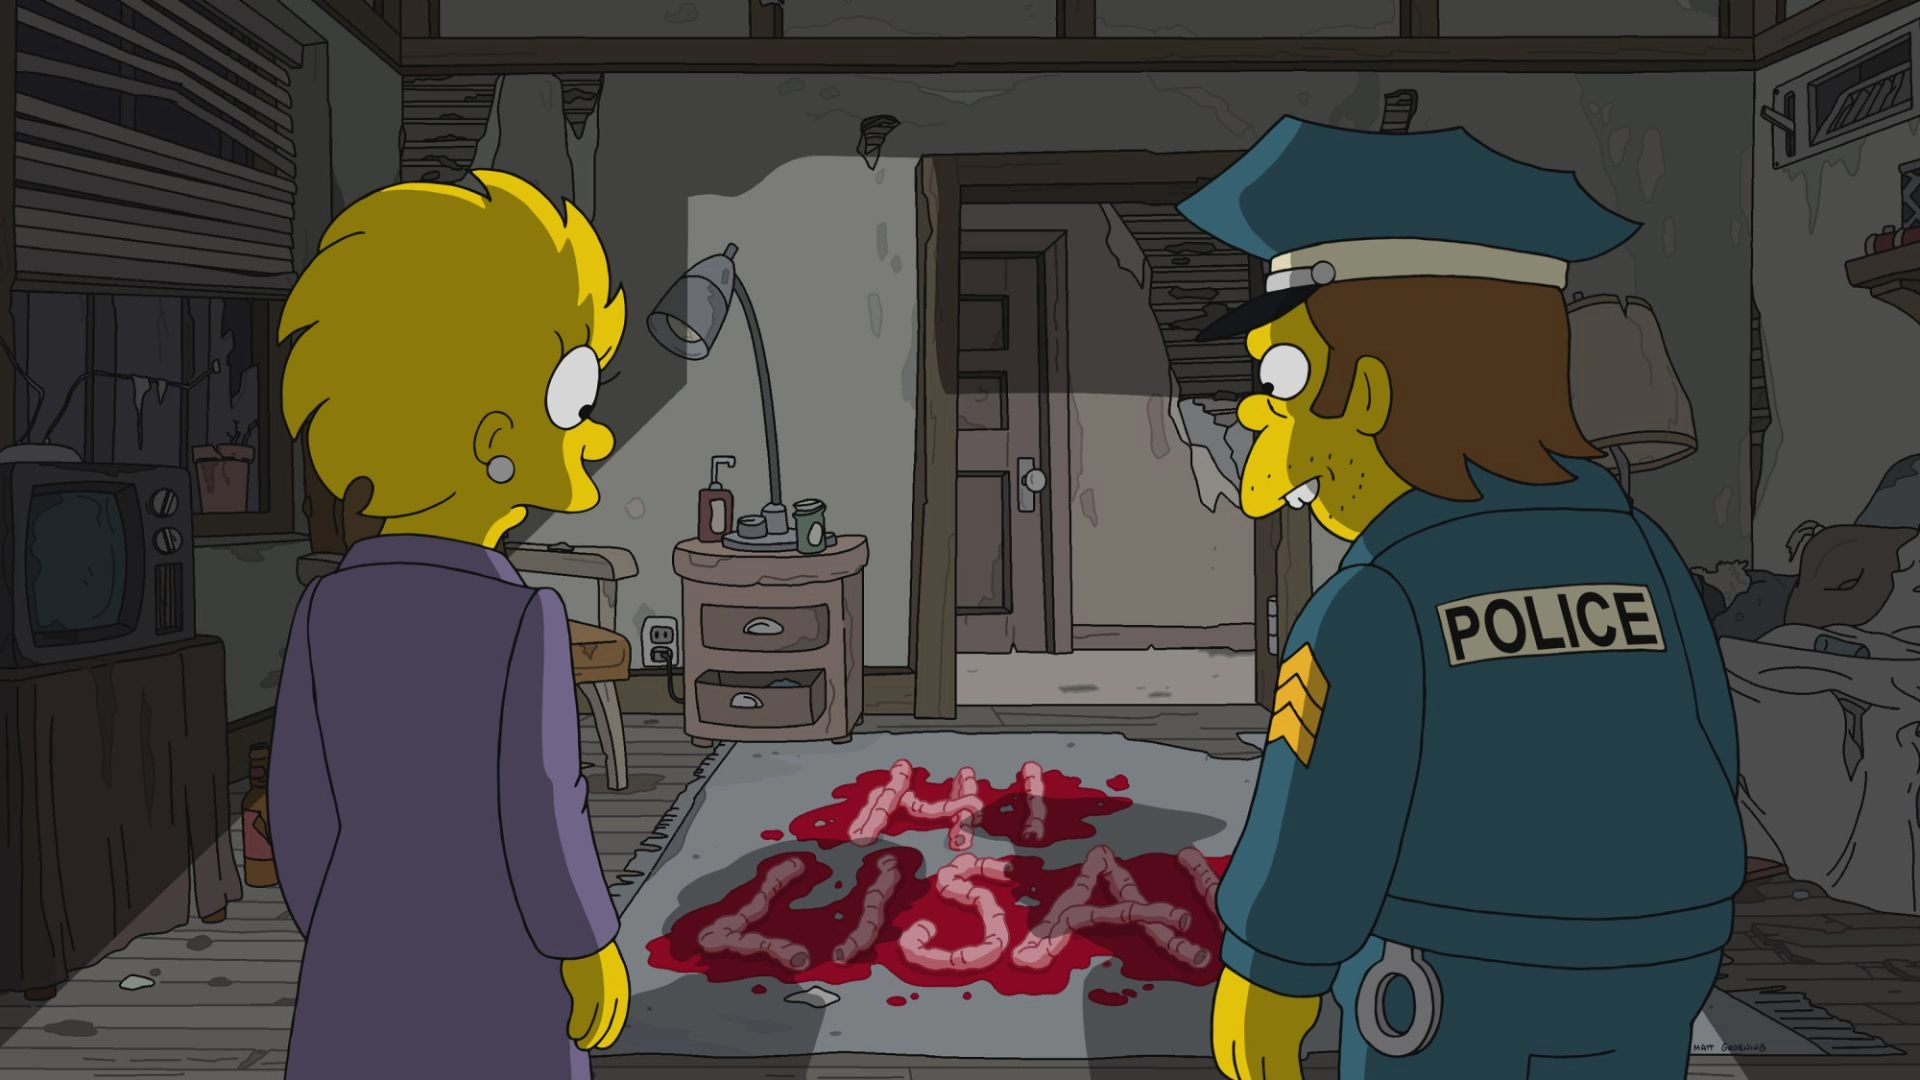 The Simpsons Reveal New Horror Episode Inspired by Classic Film